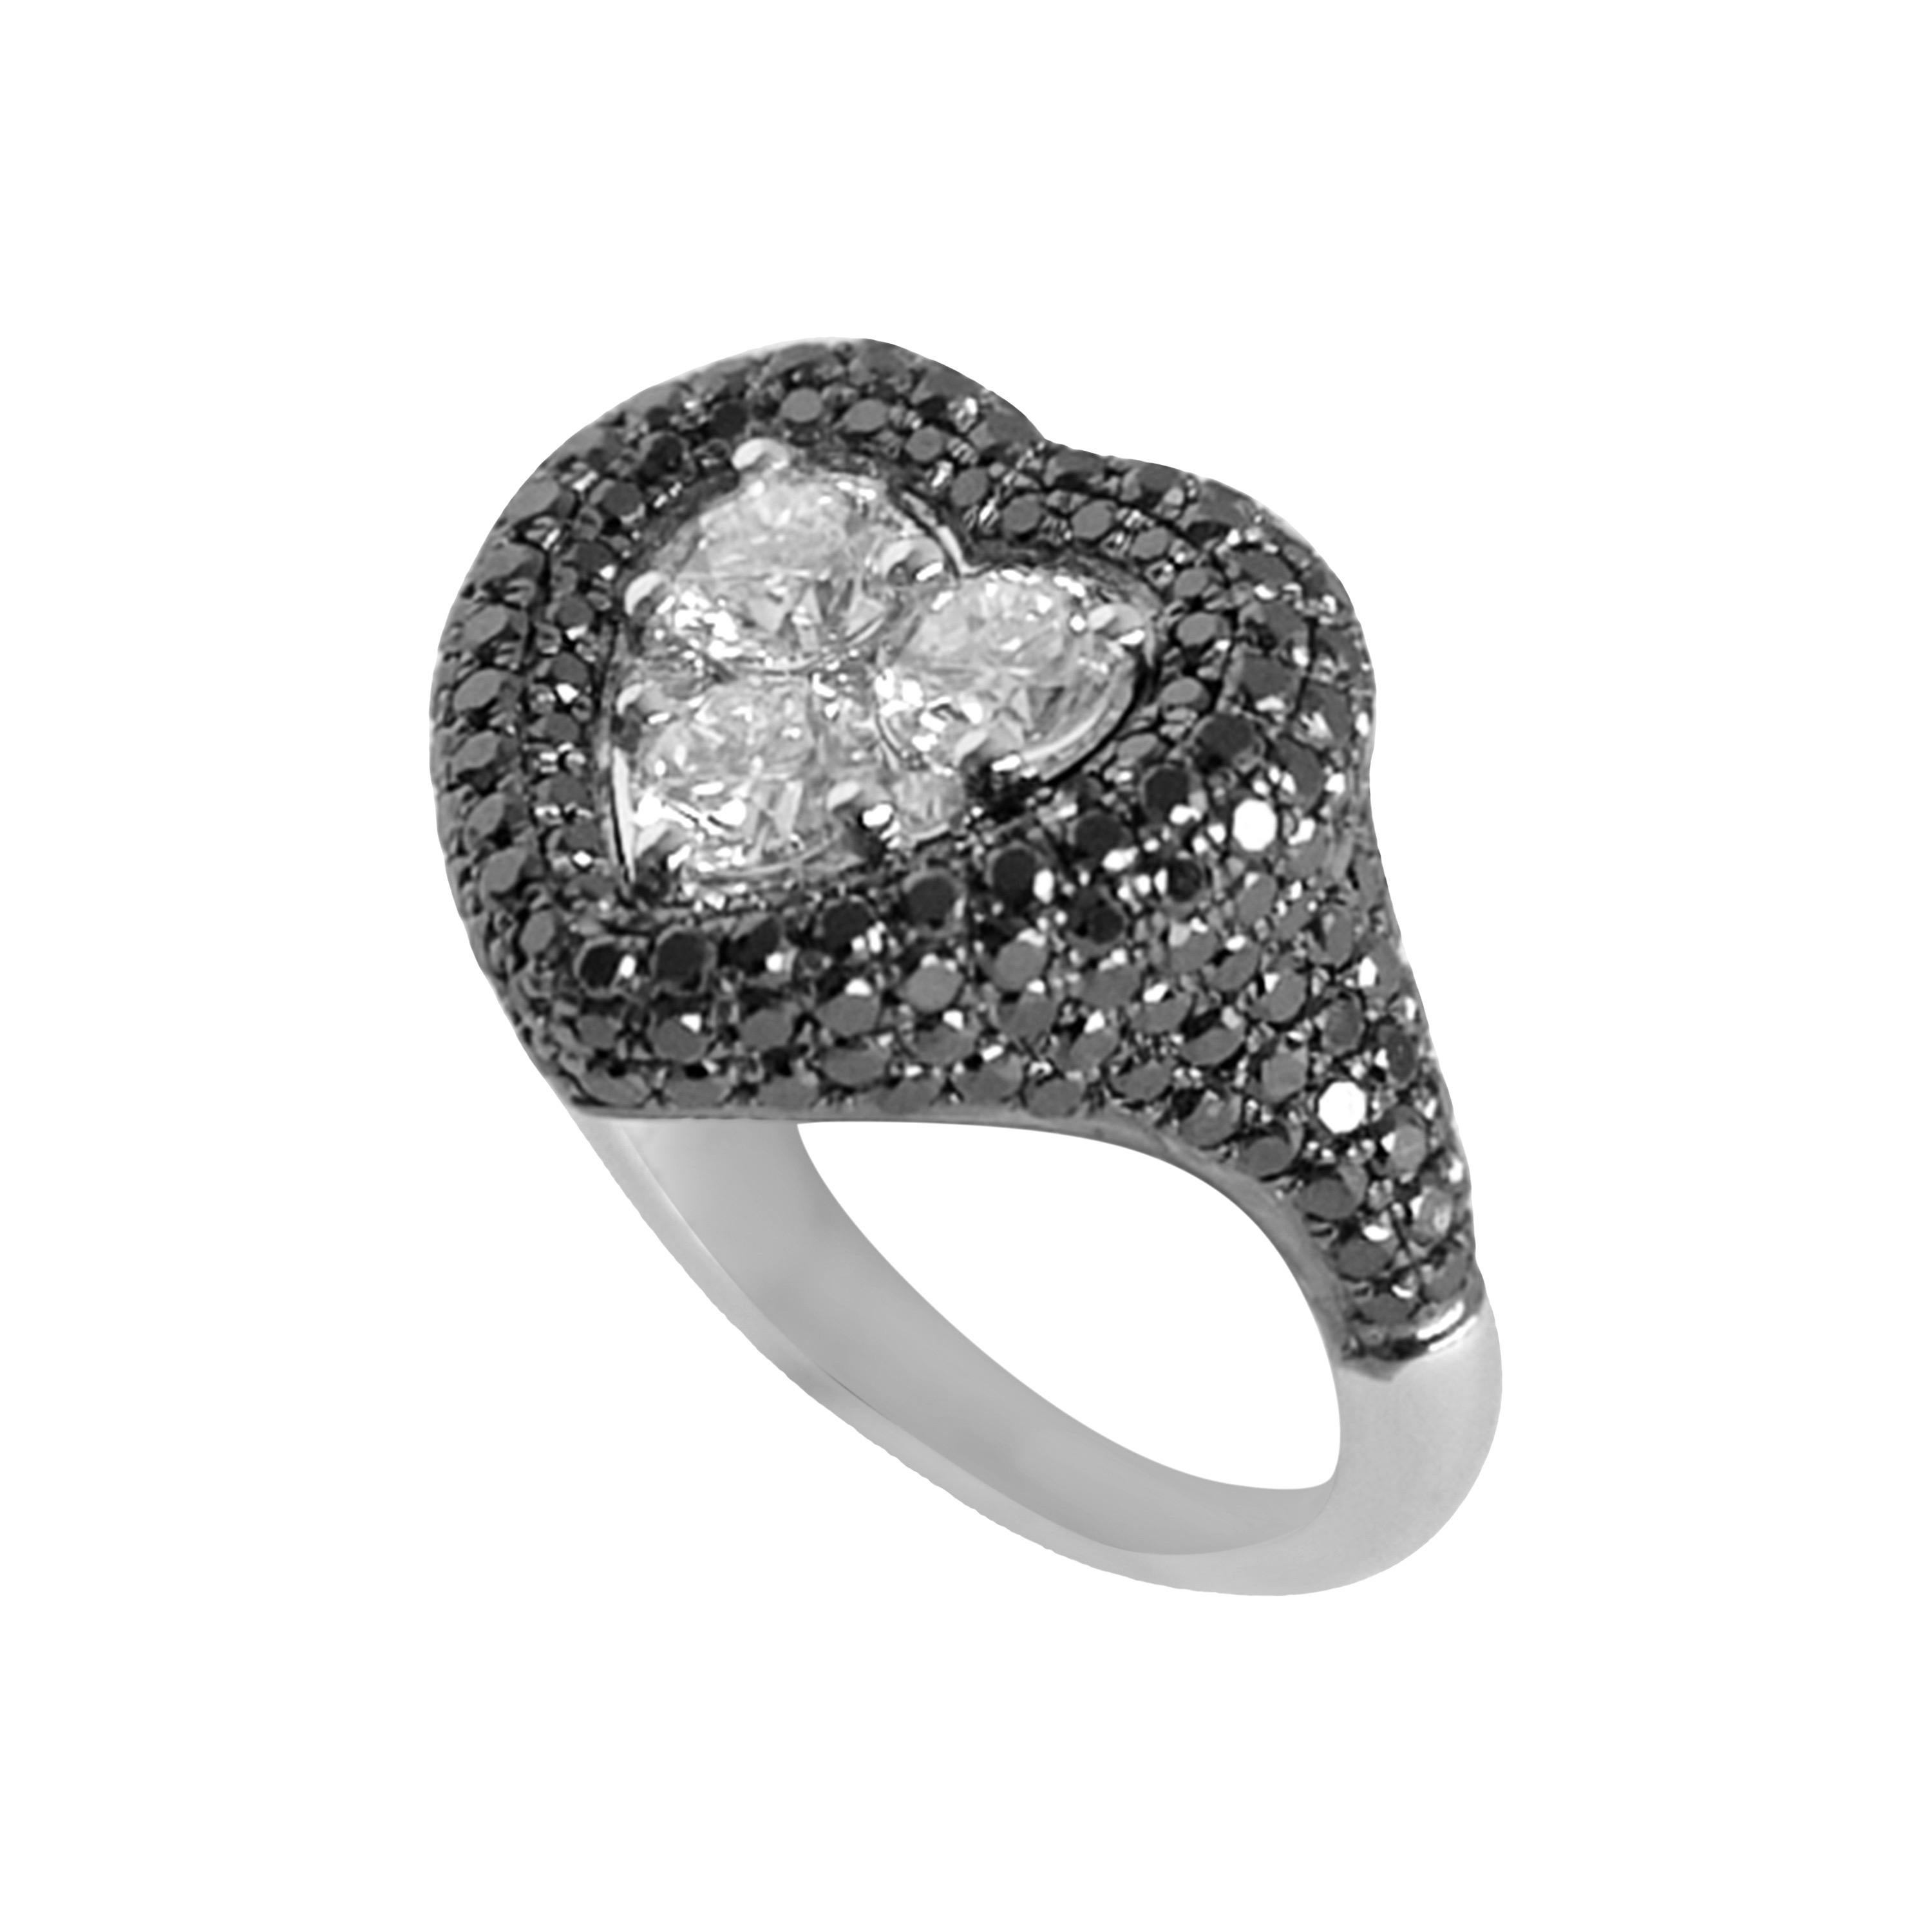 For Sale:  Manaal Heart Pinky Ring, 1.93 Carat Diamonds, Fashion Ring 4